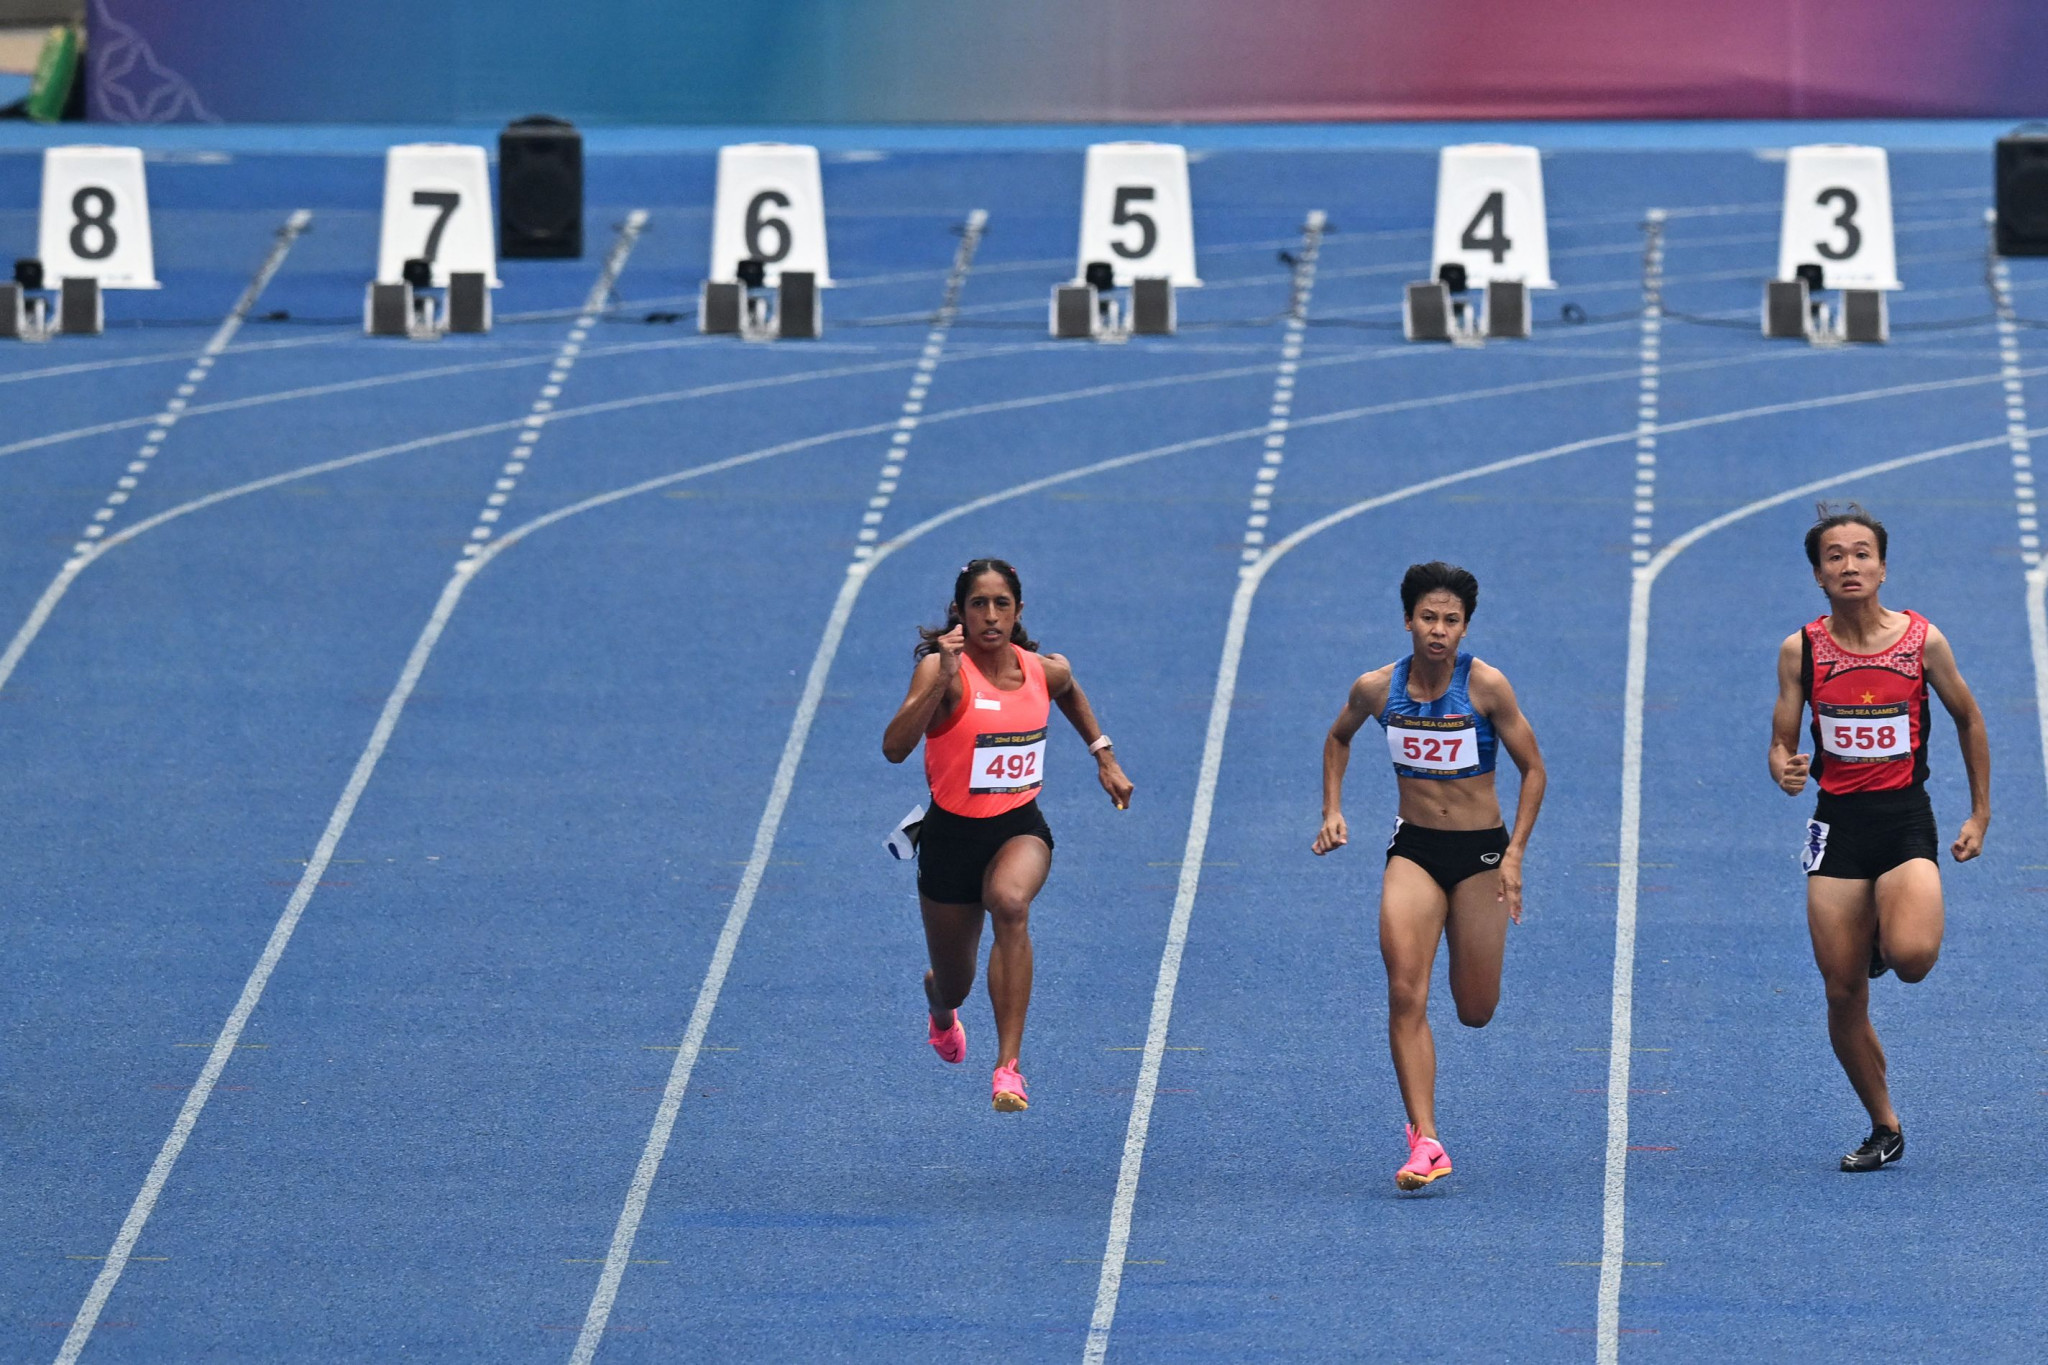 Veronica Shanti Pereira, left, won the women's 100m crown at the Southeast Asian Games in Cambodia ©Getty Images